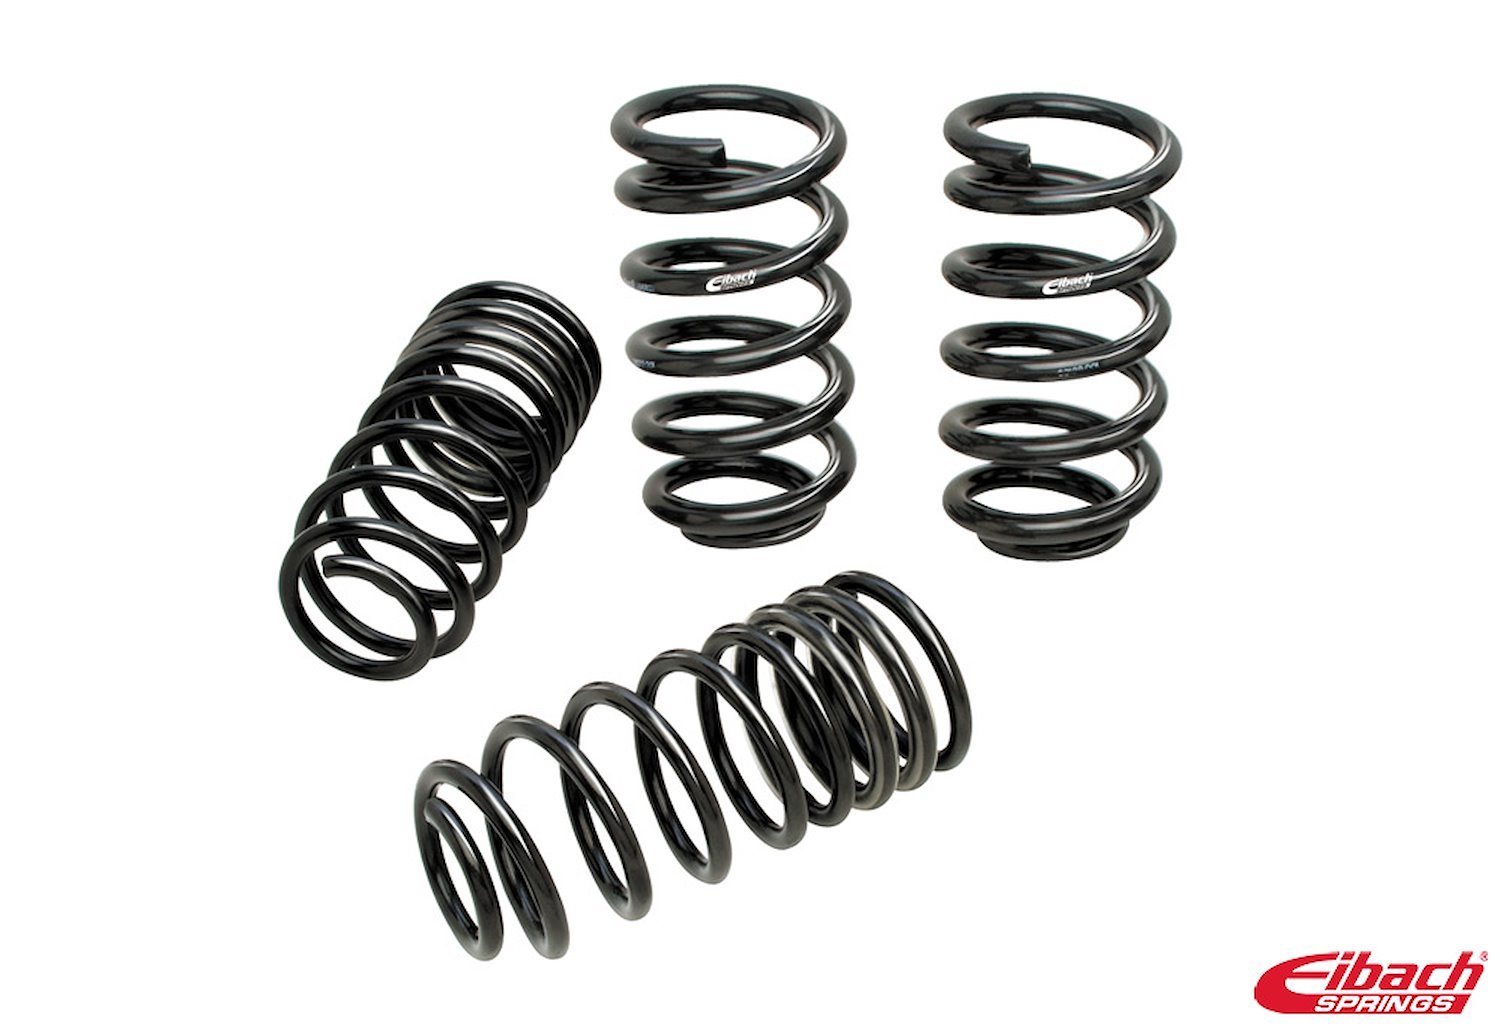 38131.540 Pro-SUV Lowering Springs 2007-13 Avalanche - 2.0" Front/Rear Drop